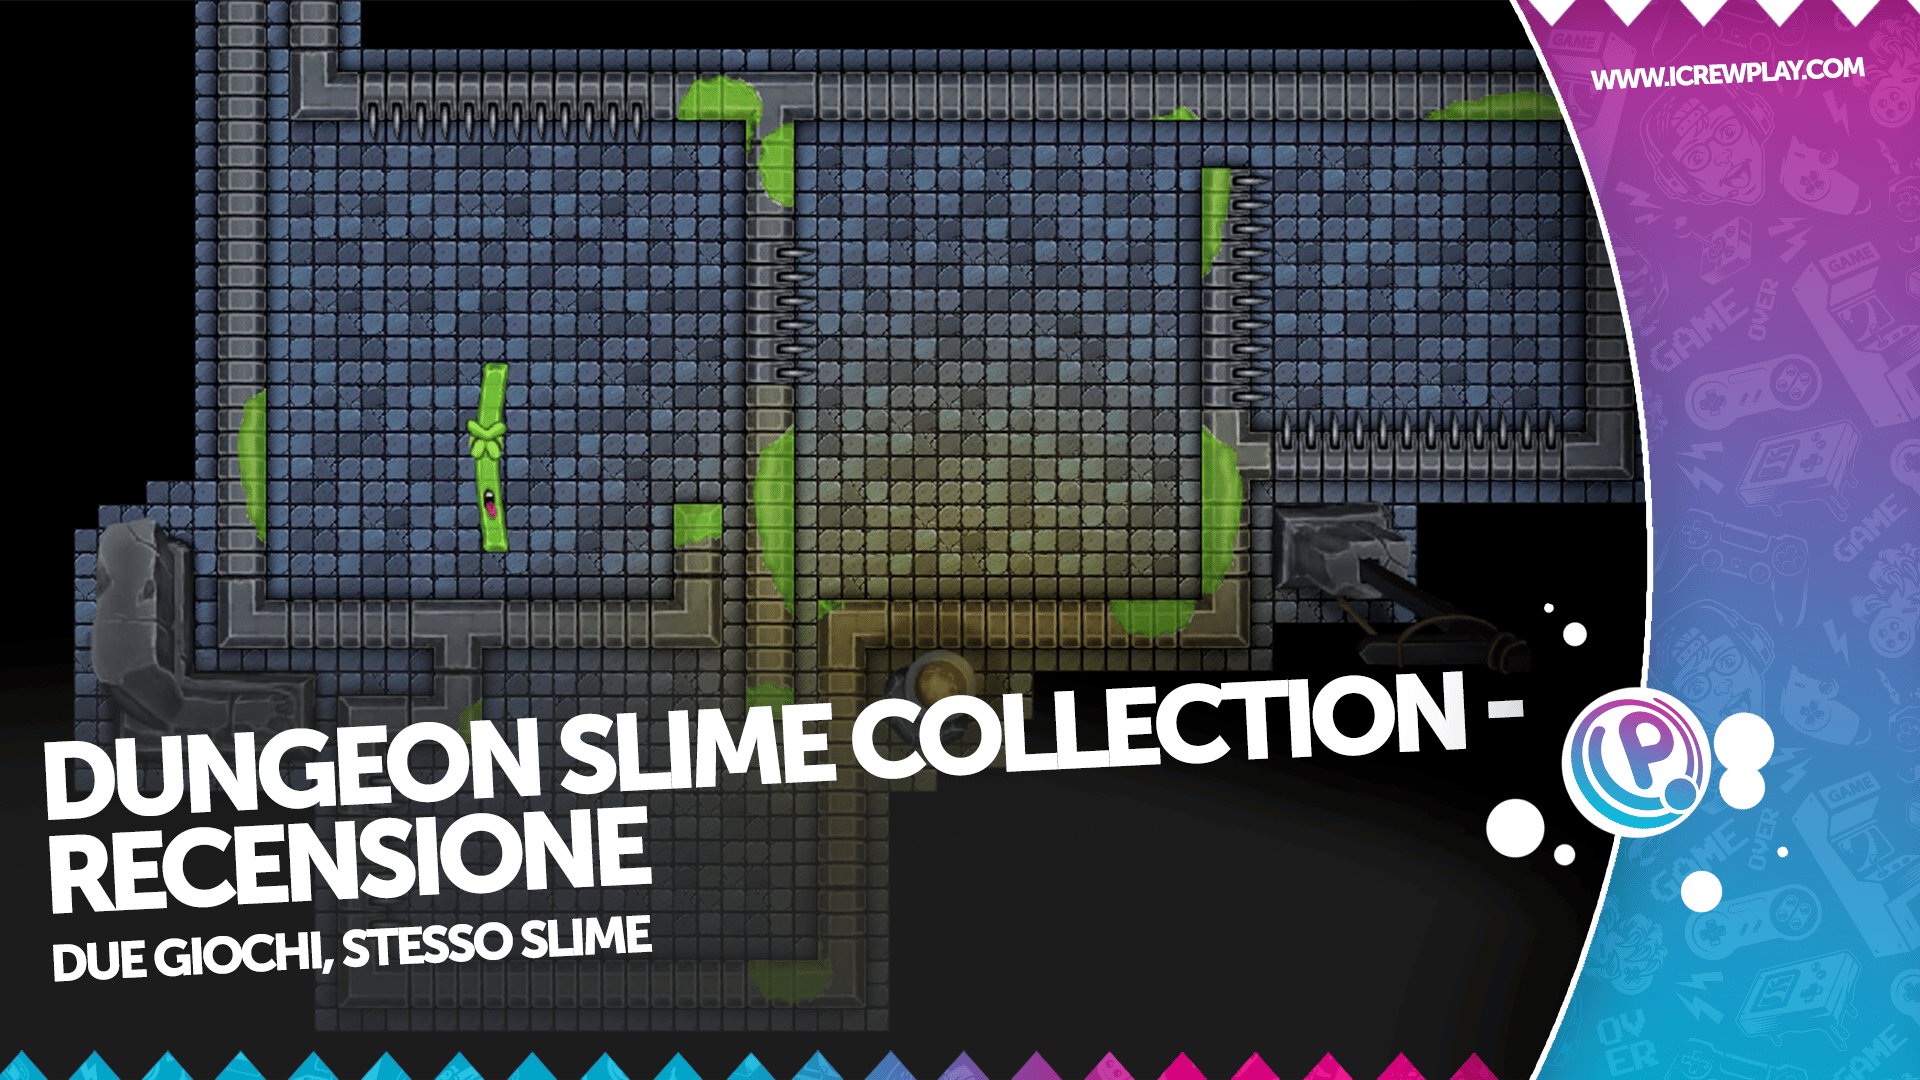 Dungeon Slime Collection - Recensione per Nintendo Switch 14